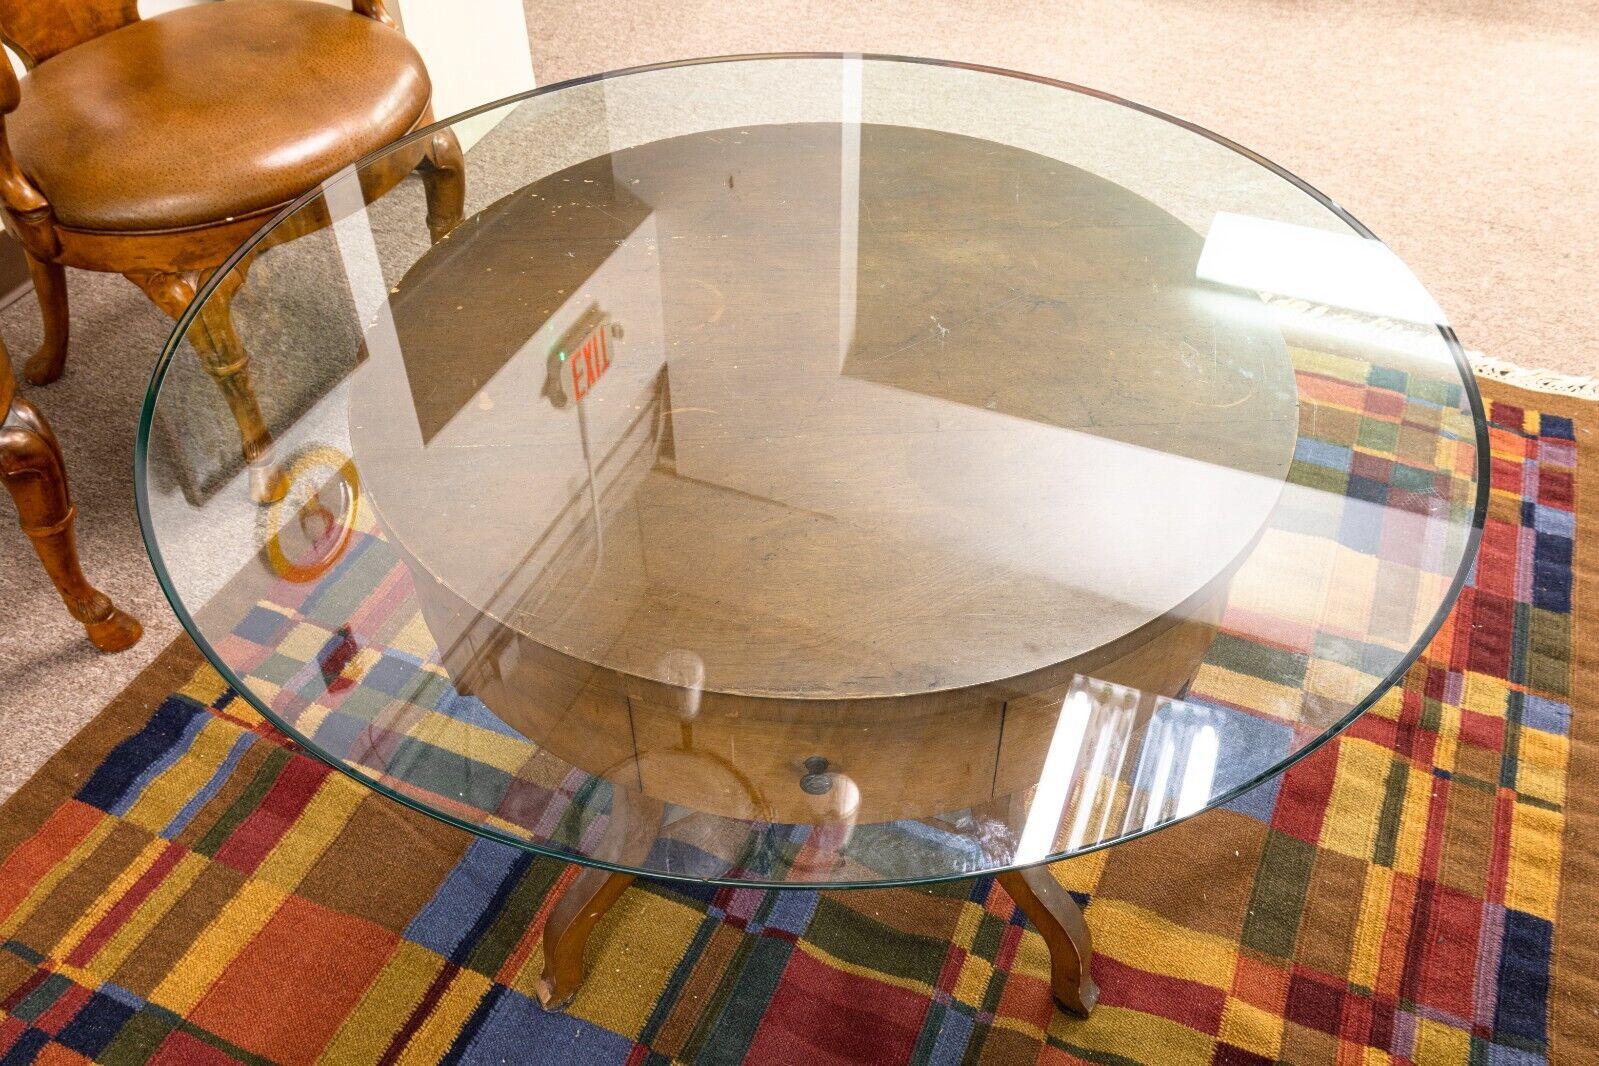 Vintage Cassard Chateau Original Wood and Glass Round Dintette Table In Good Condition For Sale In Keego Harbor, MI